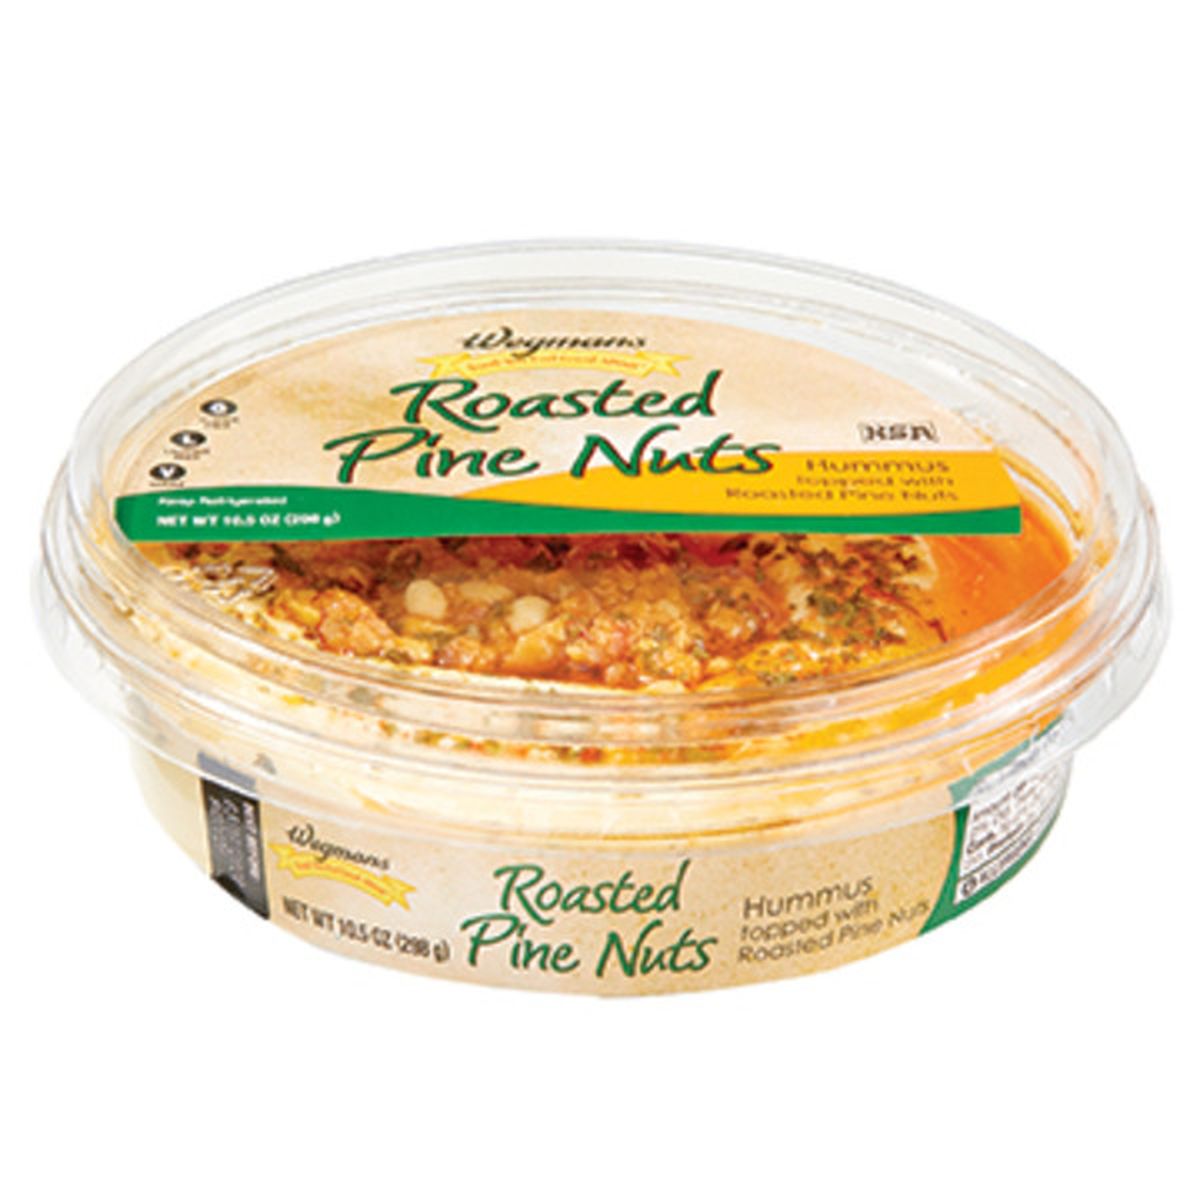 Calories in Wegmans Original Hummus Topped with Roasted Pine Nuts